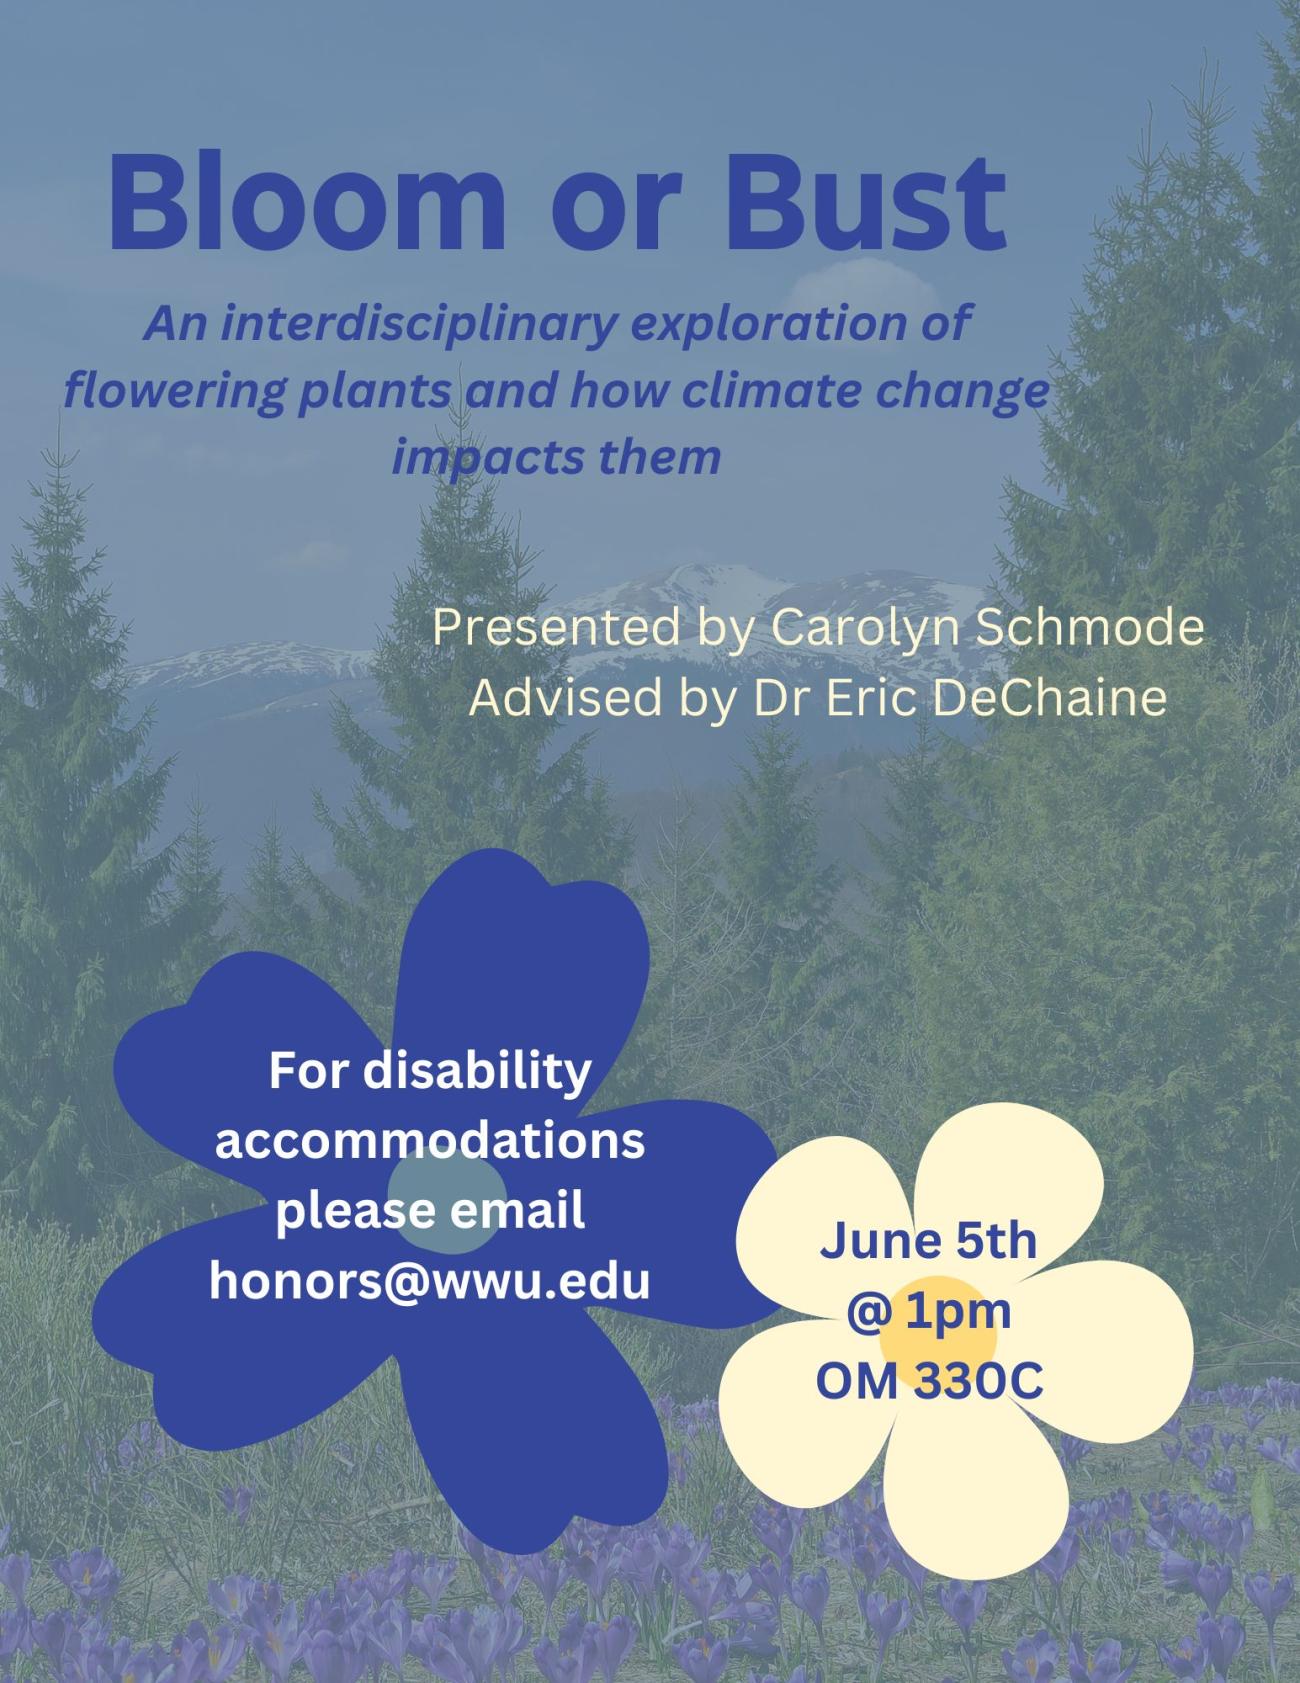 Poster background a photo of evergreen trees with purple flowers in the foreground and white-capped mountains in the background. Two simple cartoon flowers in blue and yellow appear at the bottom. Text reads: "Bloom or Bust. An interdisciplinary exploration of flowering plants and how climate change impacts them. Presented by Carolyn Schmode. Advised by Dr. Eric DeChaine. For disability accommodations, please email honors@wwu.edu. June 5th @ 1pm OM 330C." 